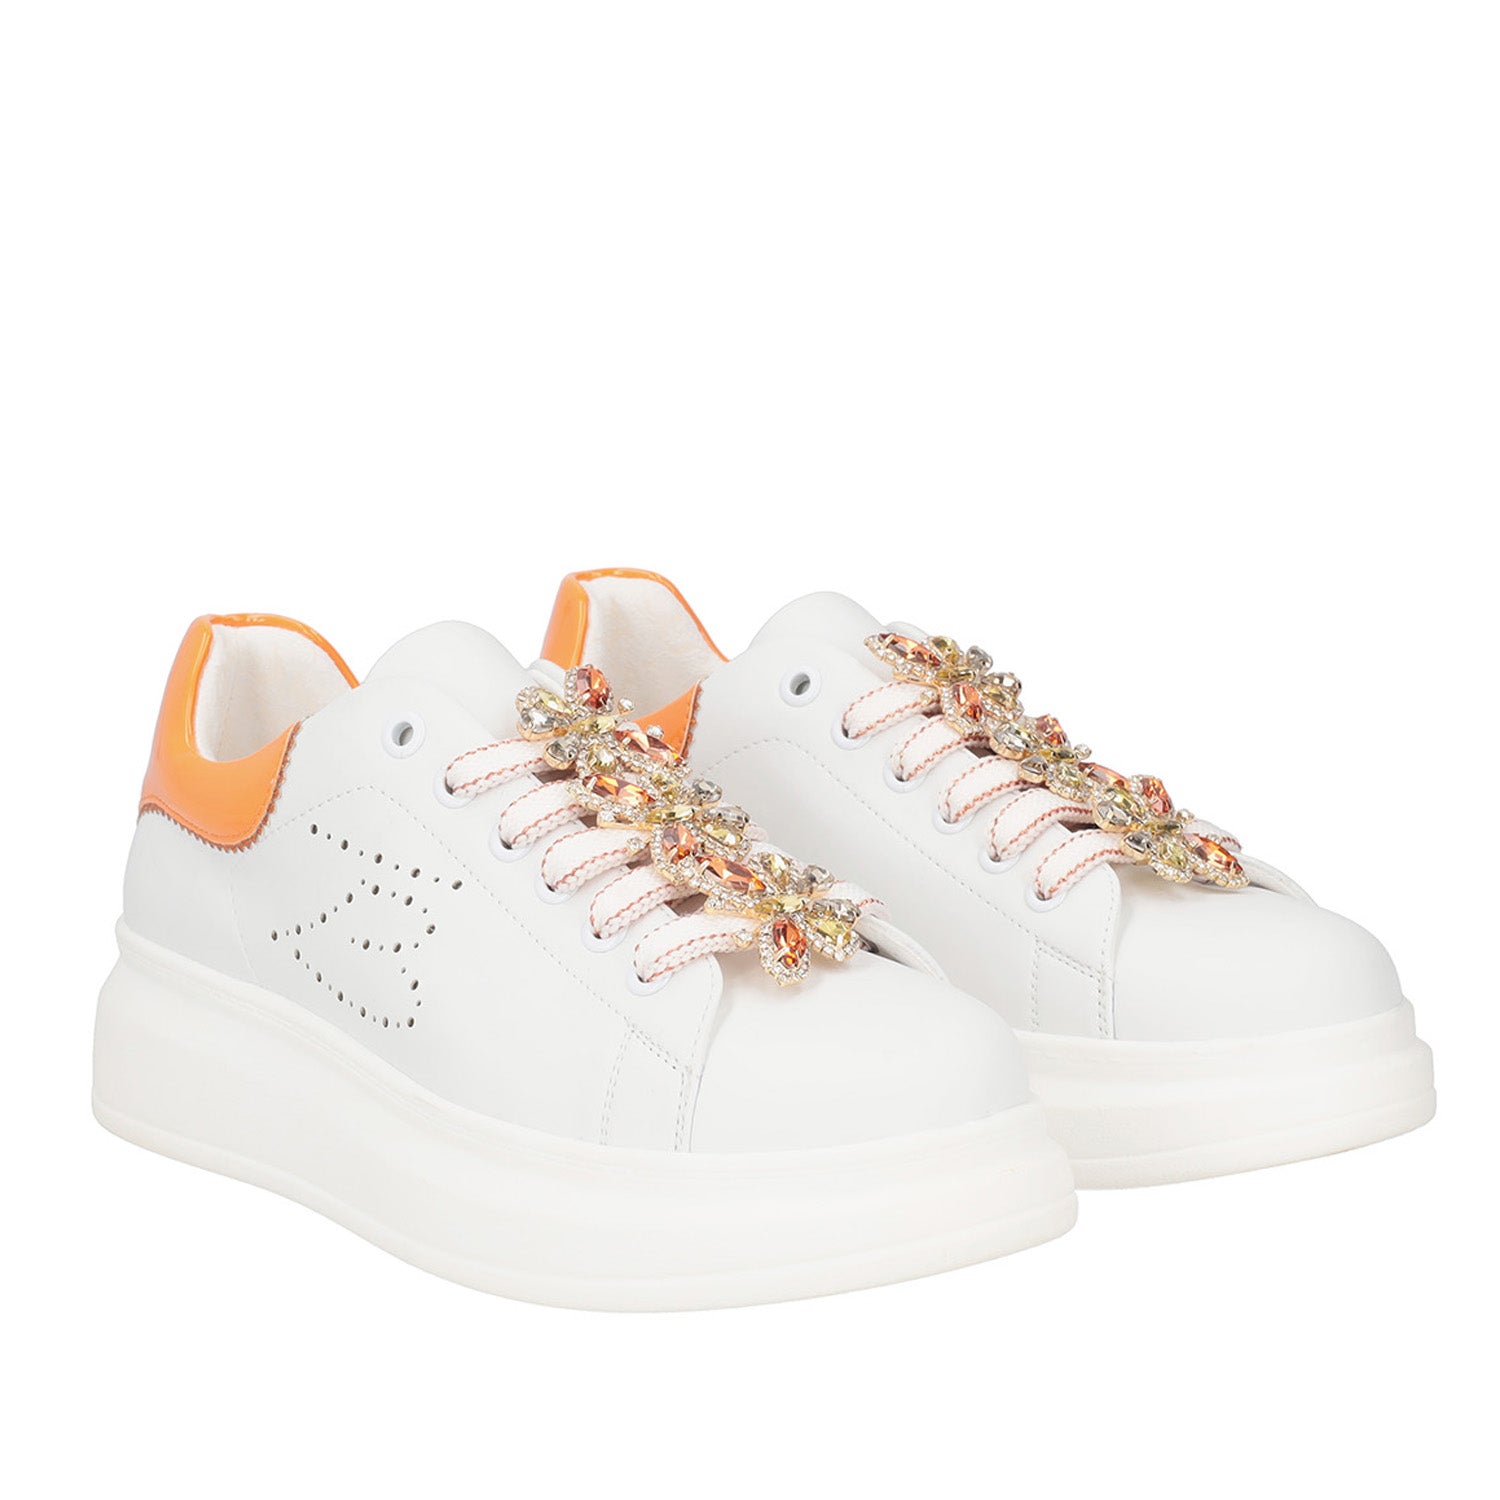 WHITE/ORANGE GLAMOUR SNEAKER WITH BUTTERFLY ACCESSORY